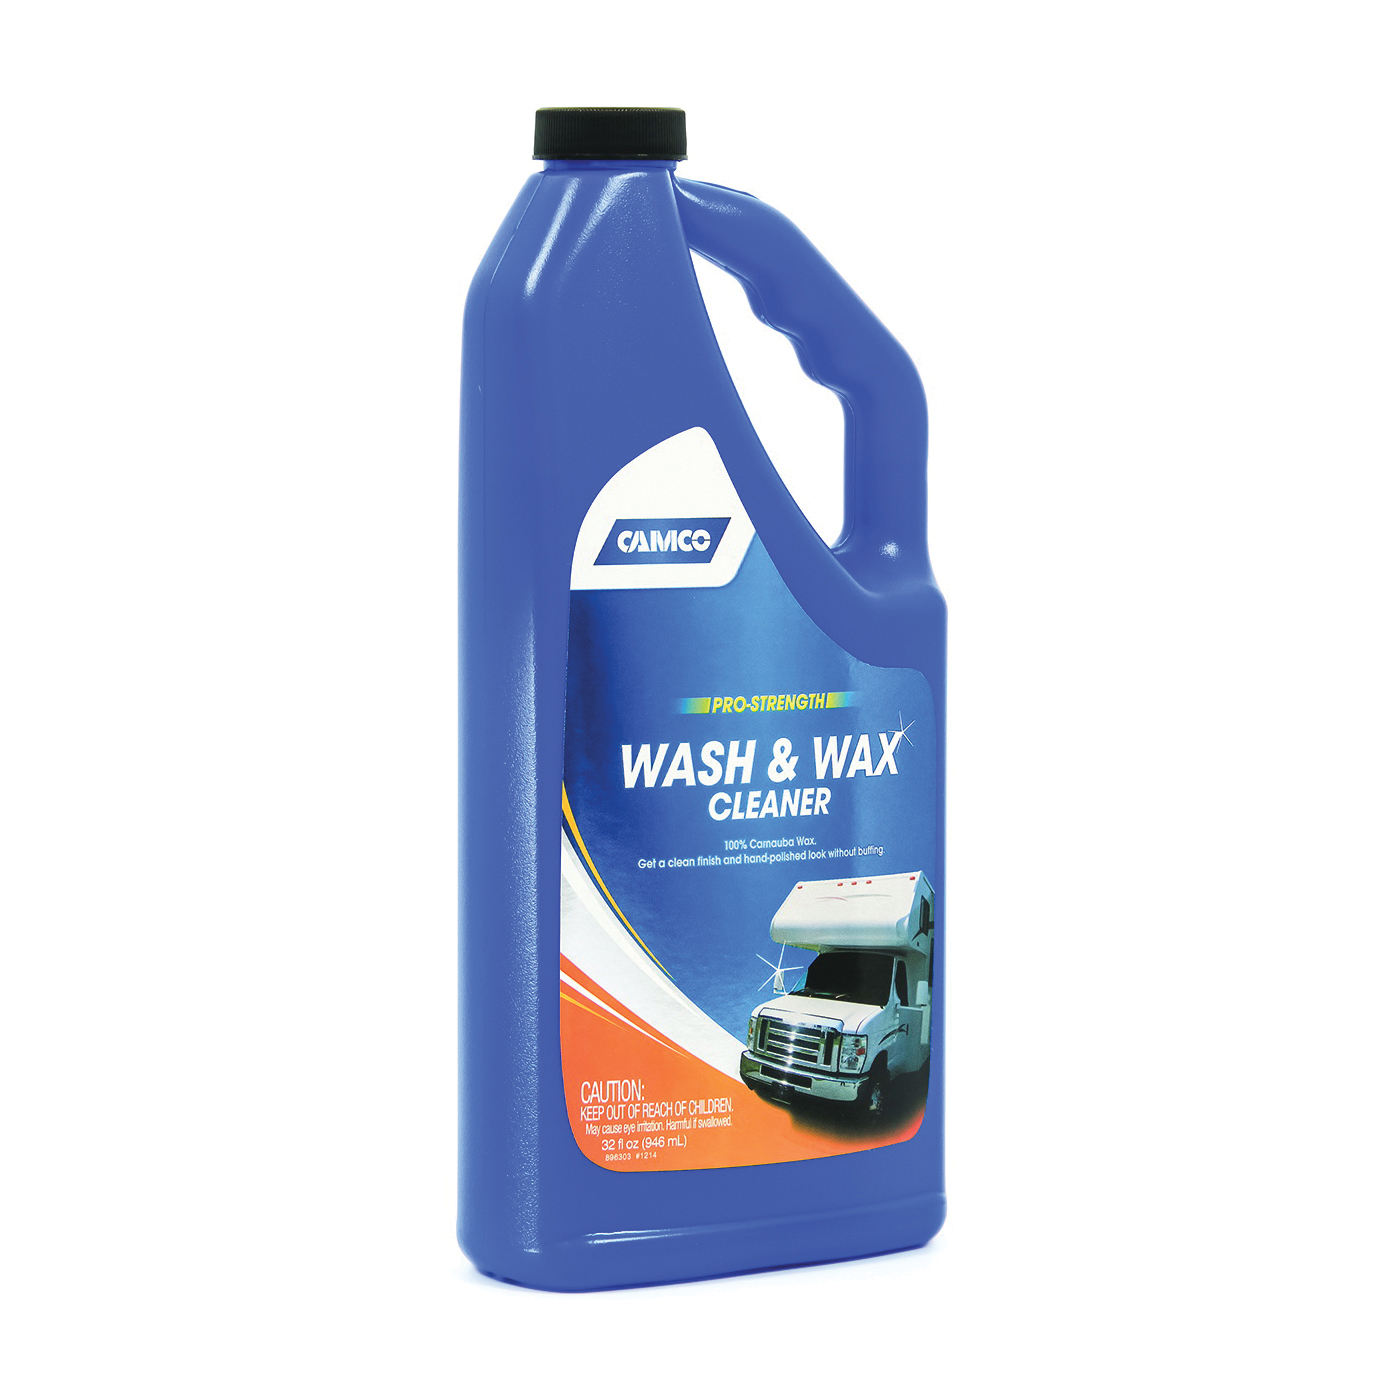 CAMCO 40493 Wash and Wax Cleaner, 32 oz Bottle, Liquid, Fresh Fragrance - 1